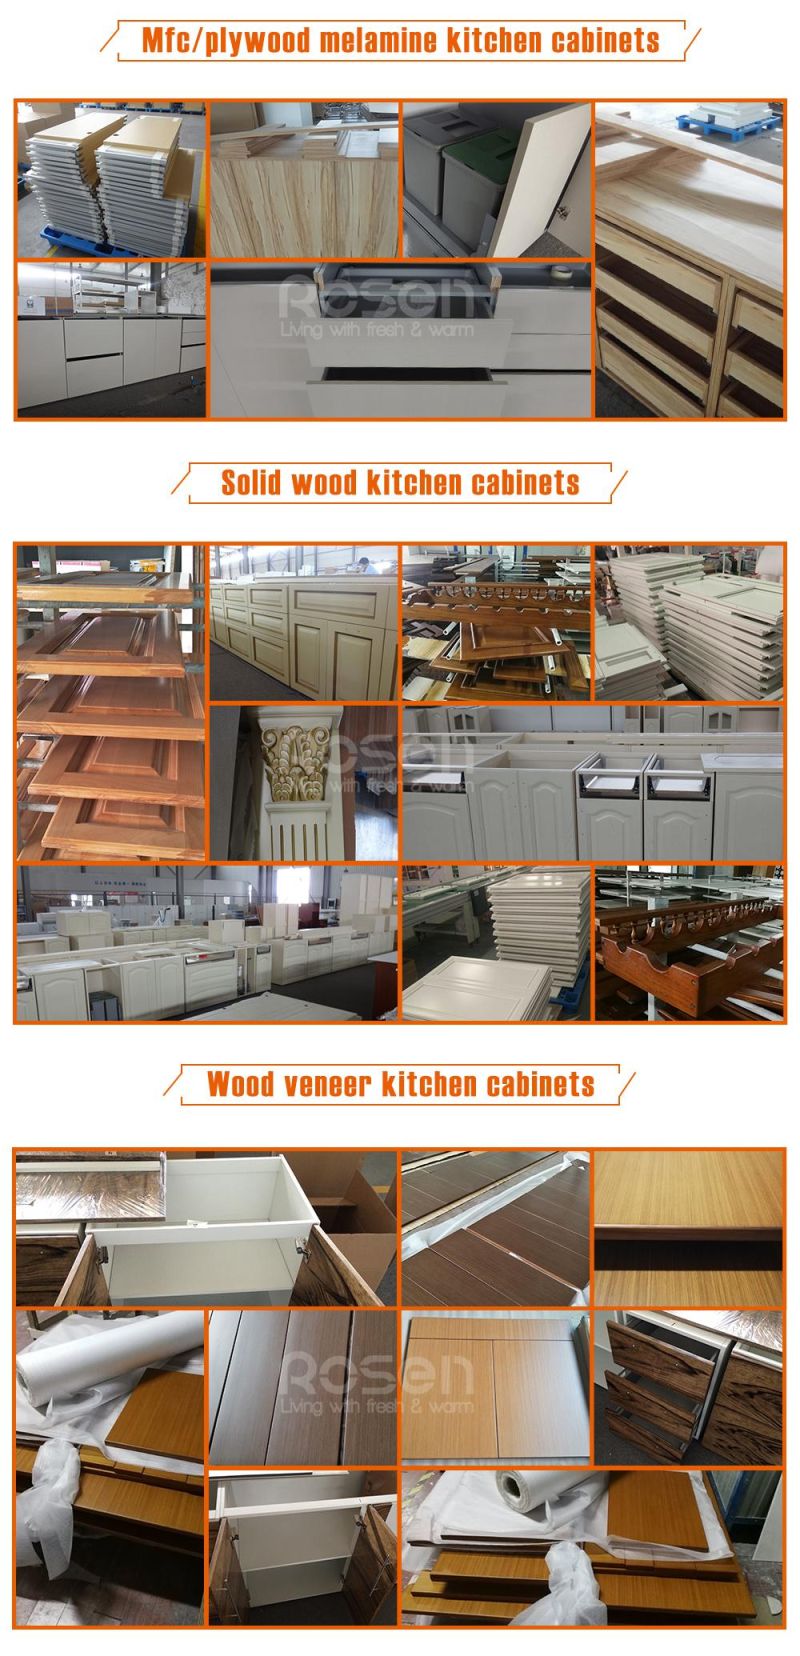 Purchase Covered with PVC Creamy Durability Kitchen Cabinets Furniture